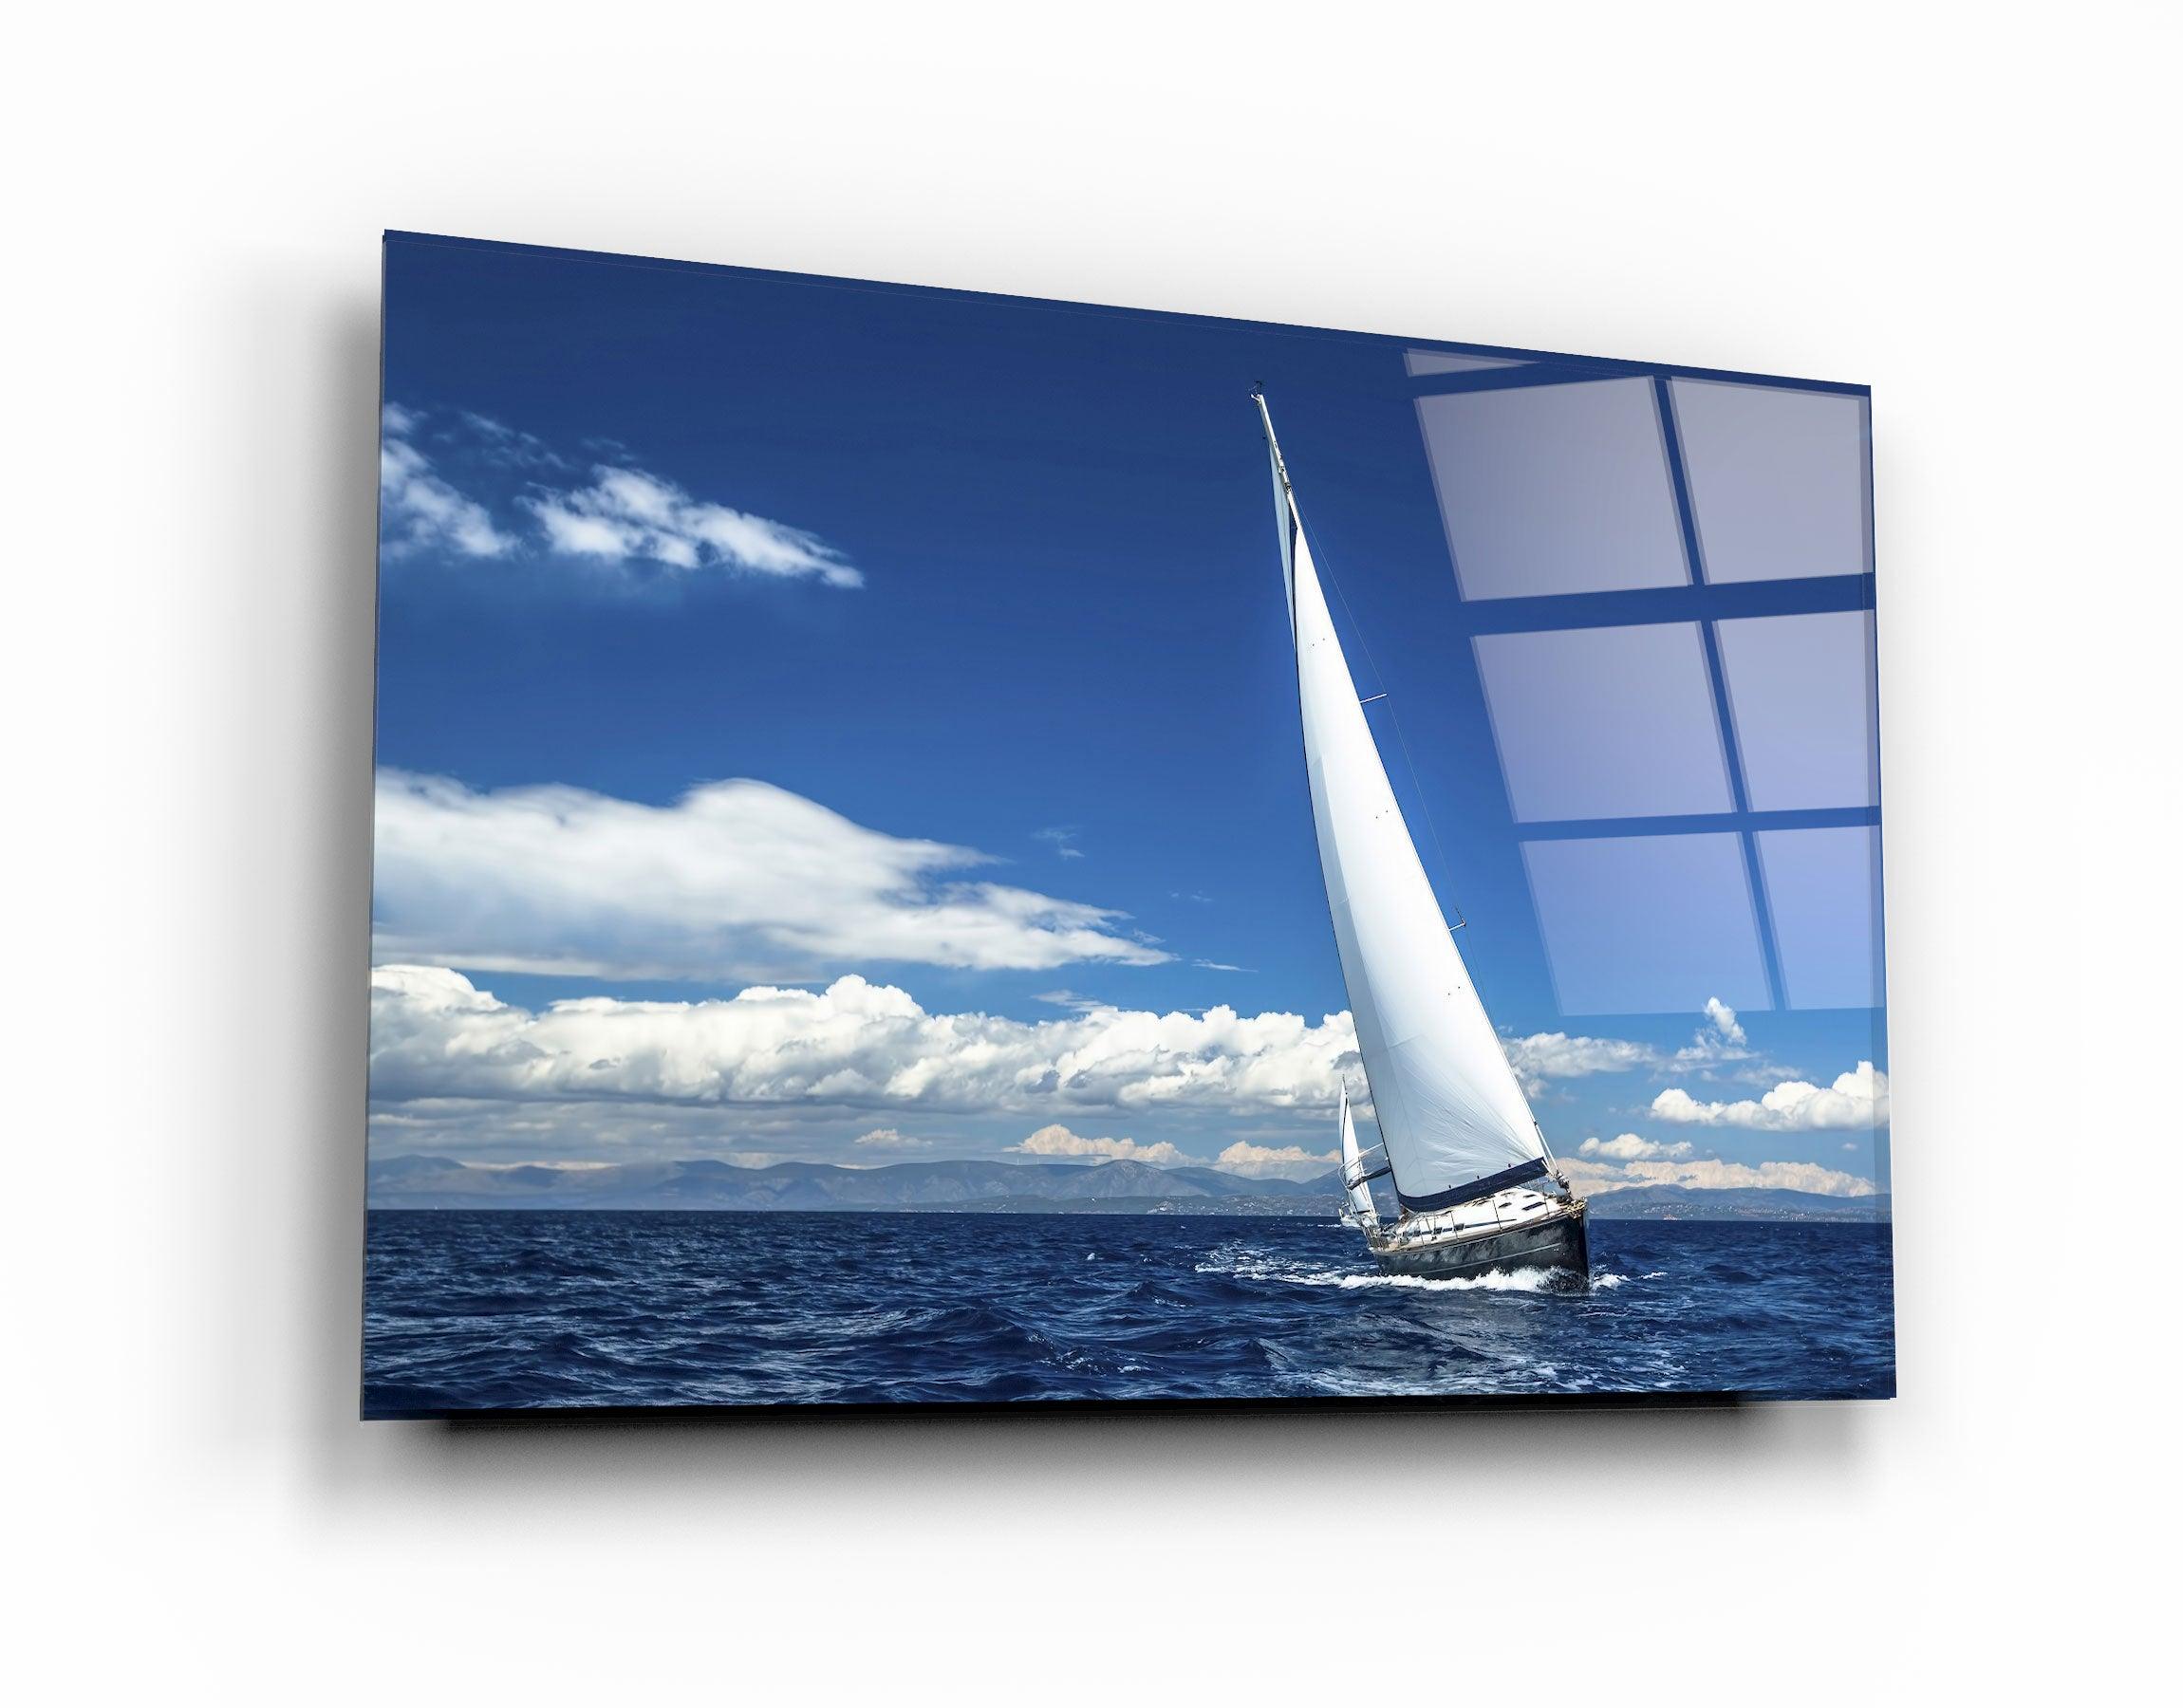 Sailing in the Ocean | Glass Printing Wall Art - ArtDesigna Glass Printing Wall Art